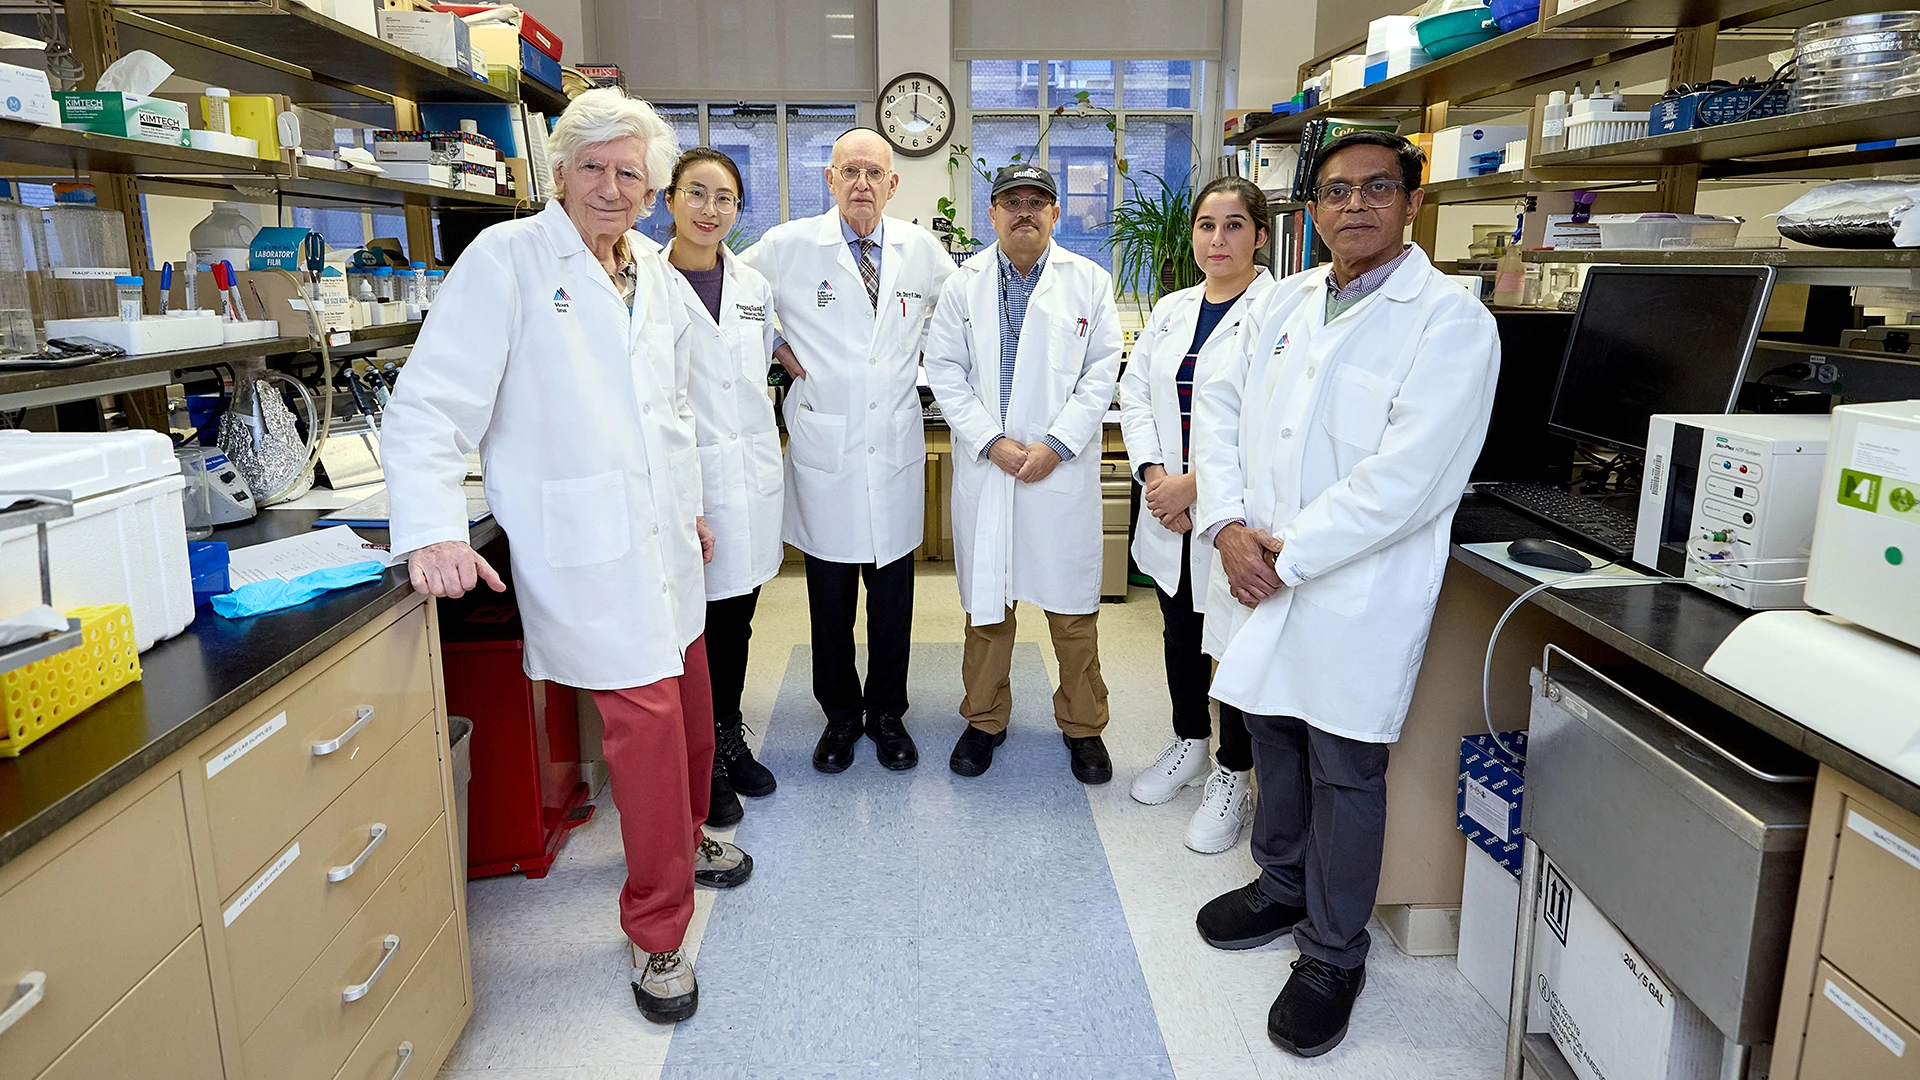 From left: Mihaly Mezei, PhD, Ping Ping Xiang, PhD, Terry F. Davies, MD, Syed Morshed, PhD, Maryam Mansoori, PhD, and Rauf Latif, PhD